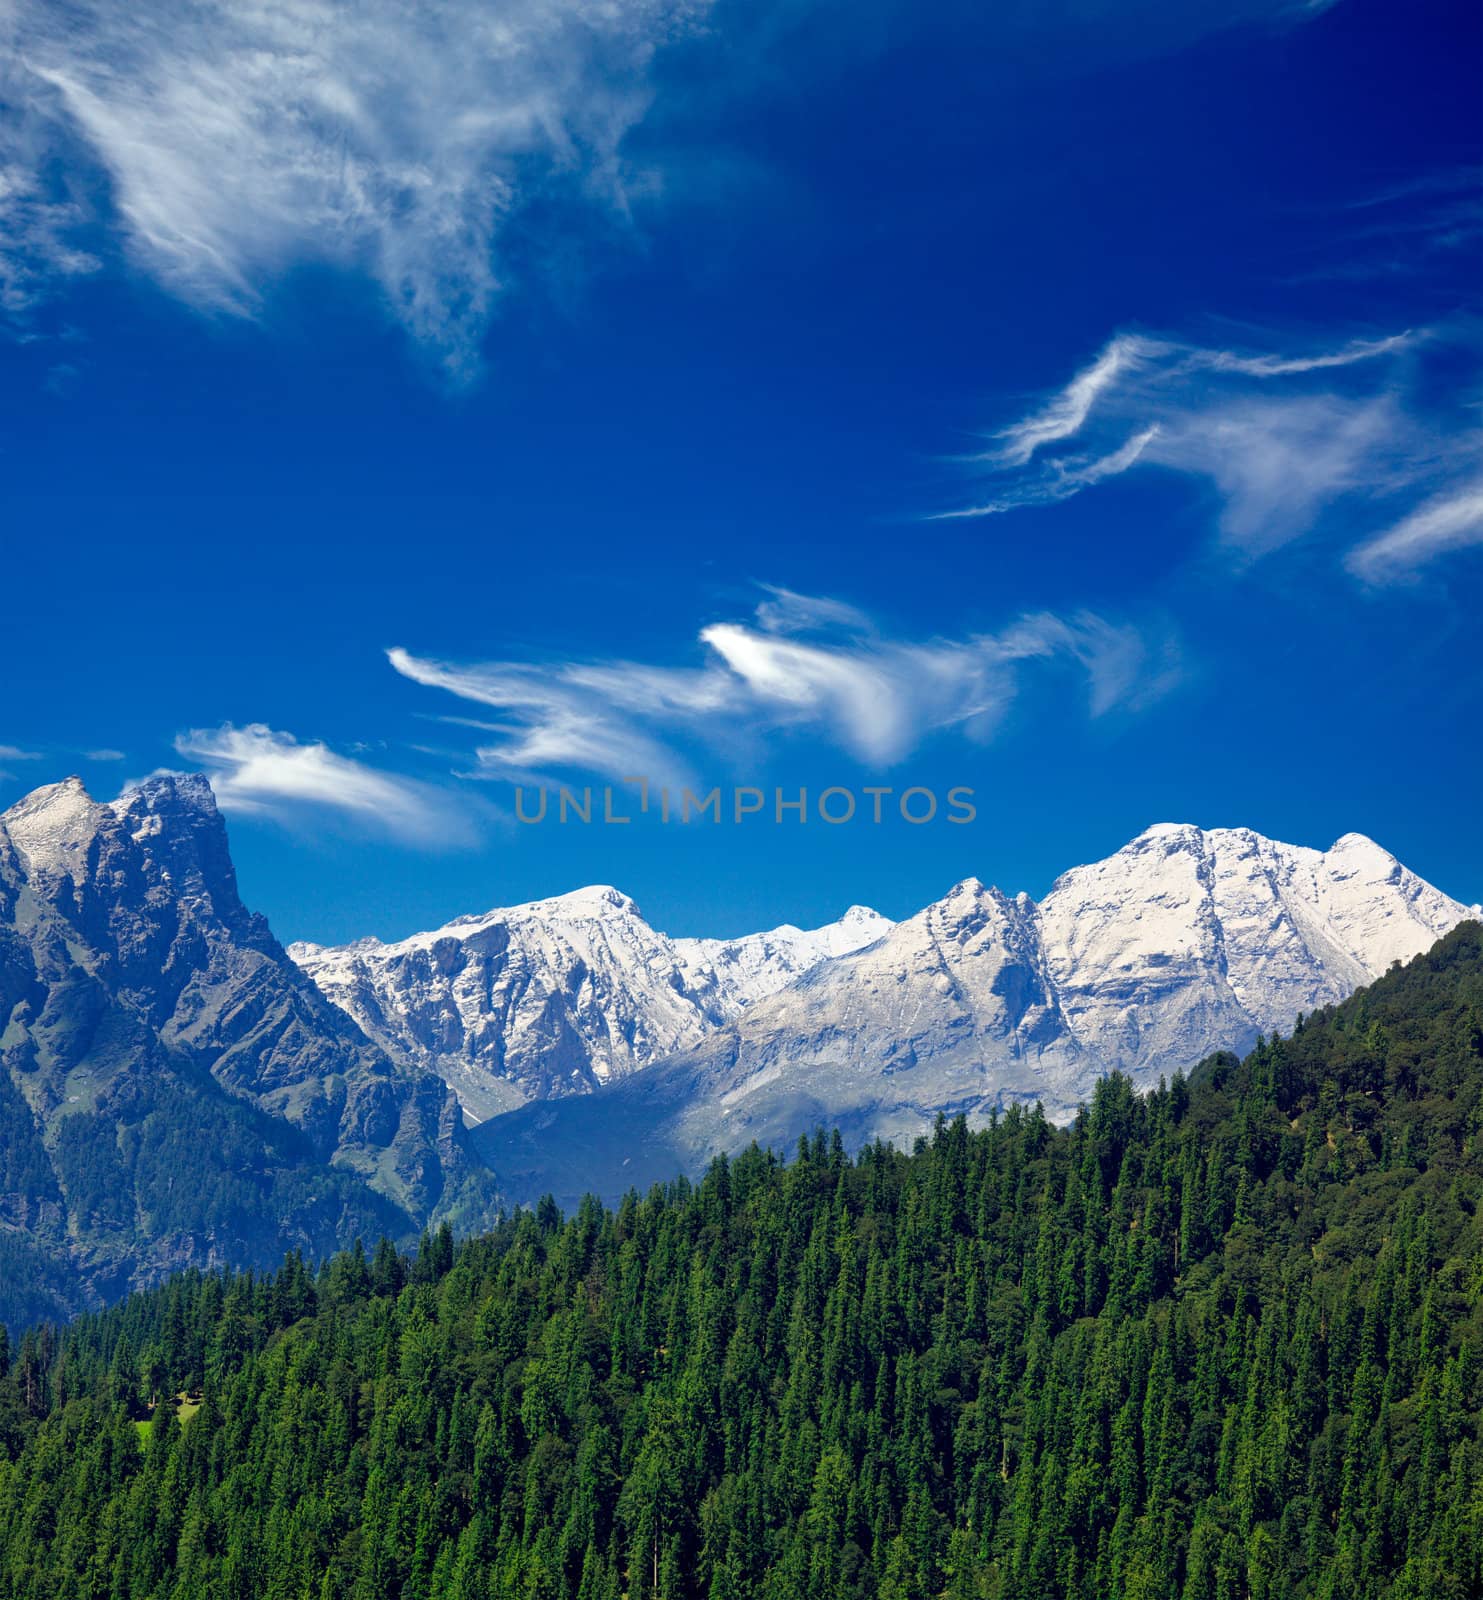 Himalayas and forest. India by dimol